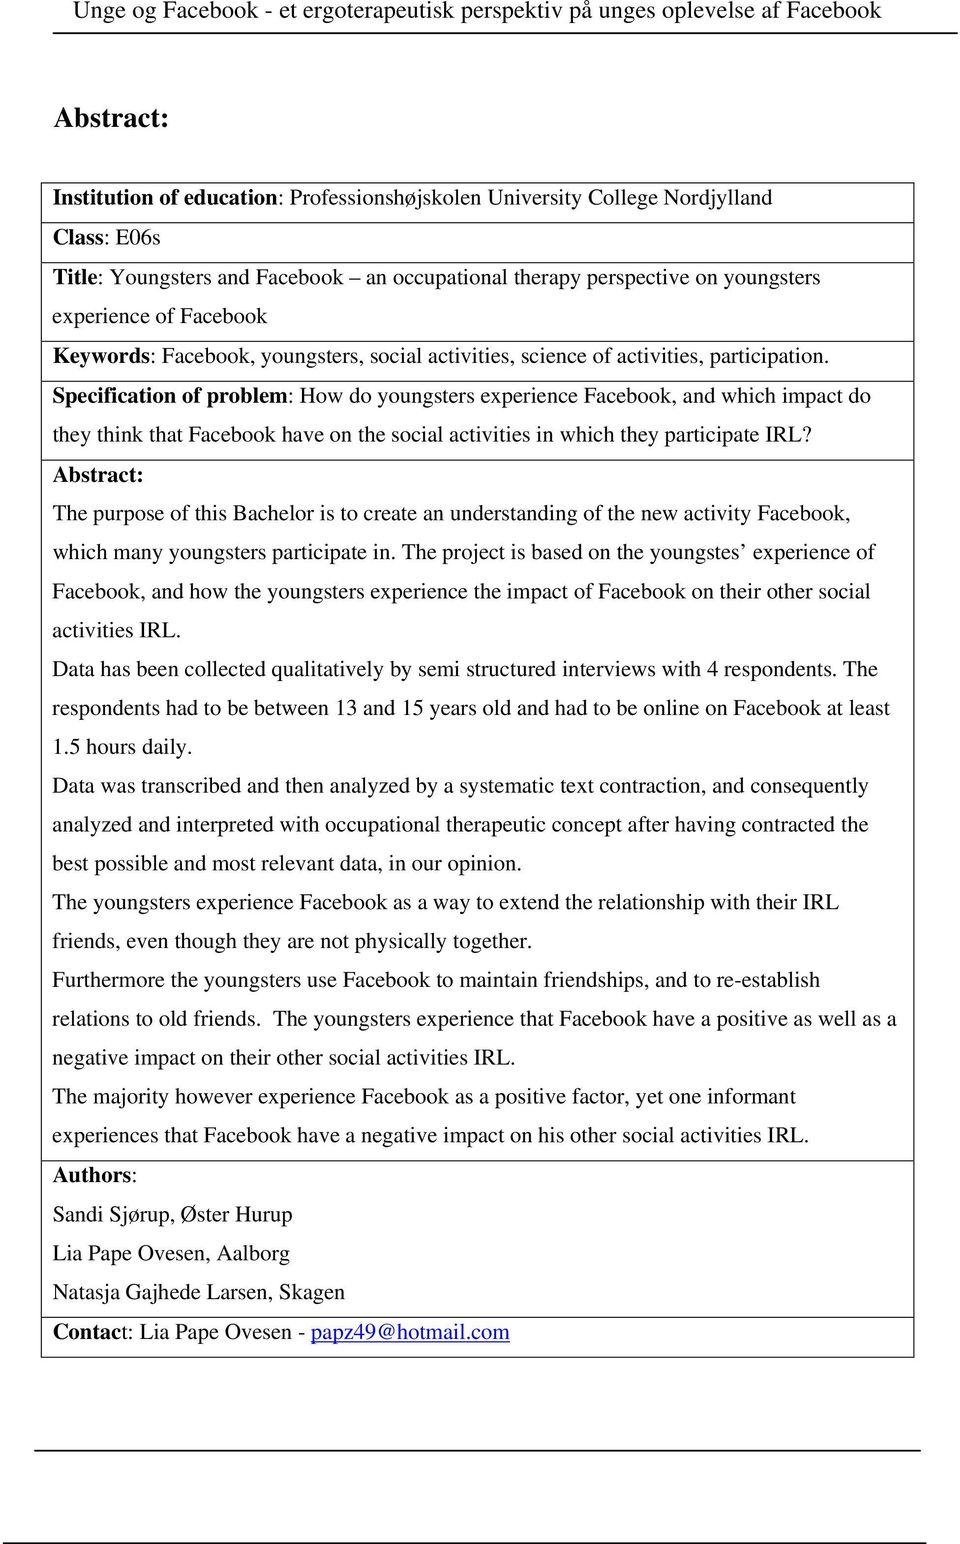 Specification of problem: How do youngsters experience Facebook, and which impact do they think that Facebook have on the social activities in which they participate IRL?